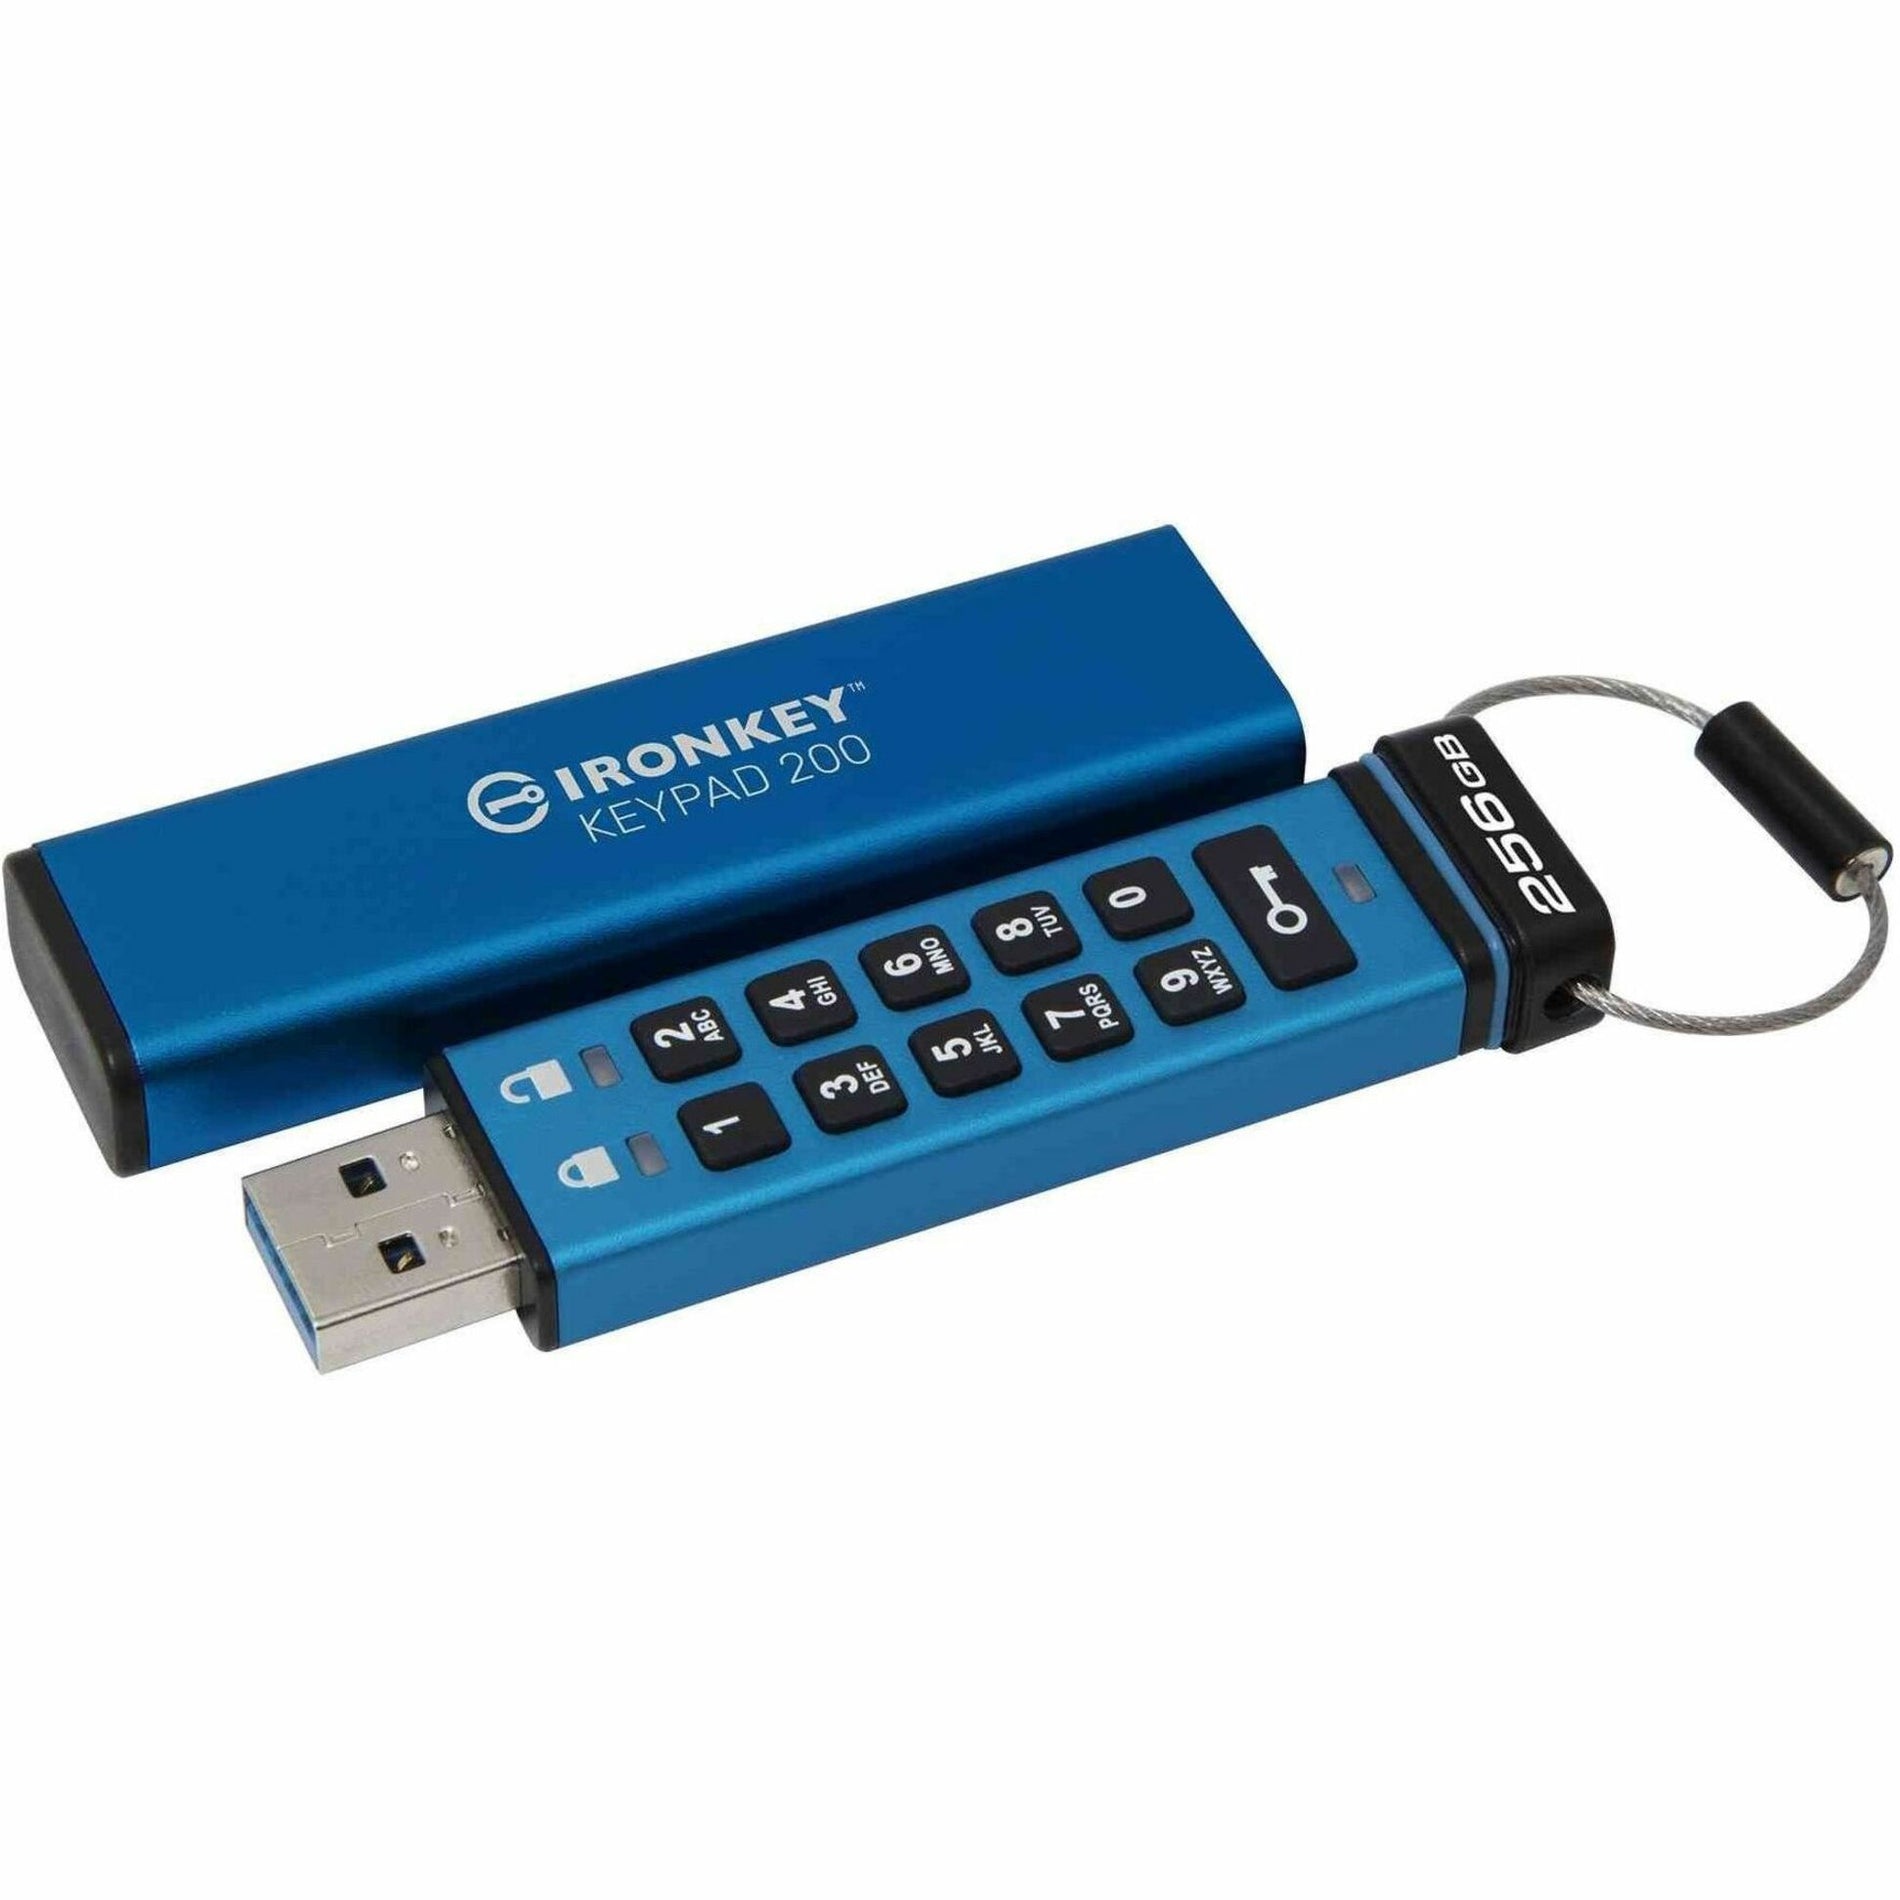 IronKey IKKP200/256GB Keypad 200 256GB USB 3.2 (Gen 1) Type A Flash Drive, Digitally Signed Secure Firmware, Customizable PIN, Tamper Resistant, Dust Proof, Water Proof, PIN Pad Protection